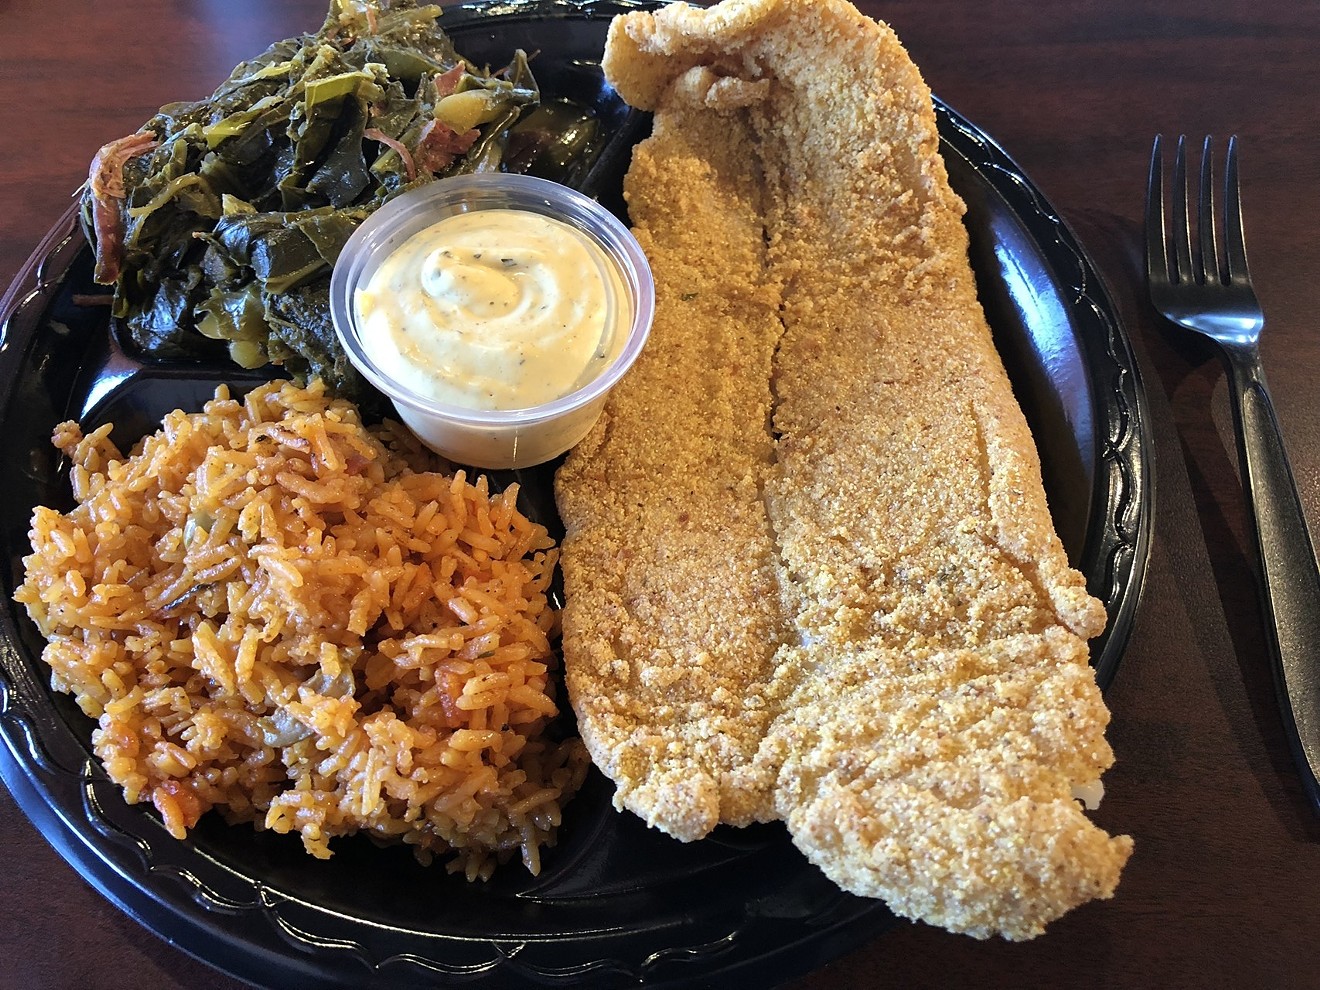 Fried swai, rice, and collards from Rhema Soul Cuisine, now in Phoenix.